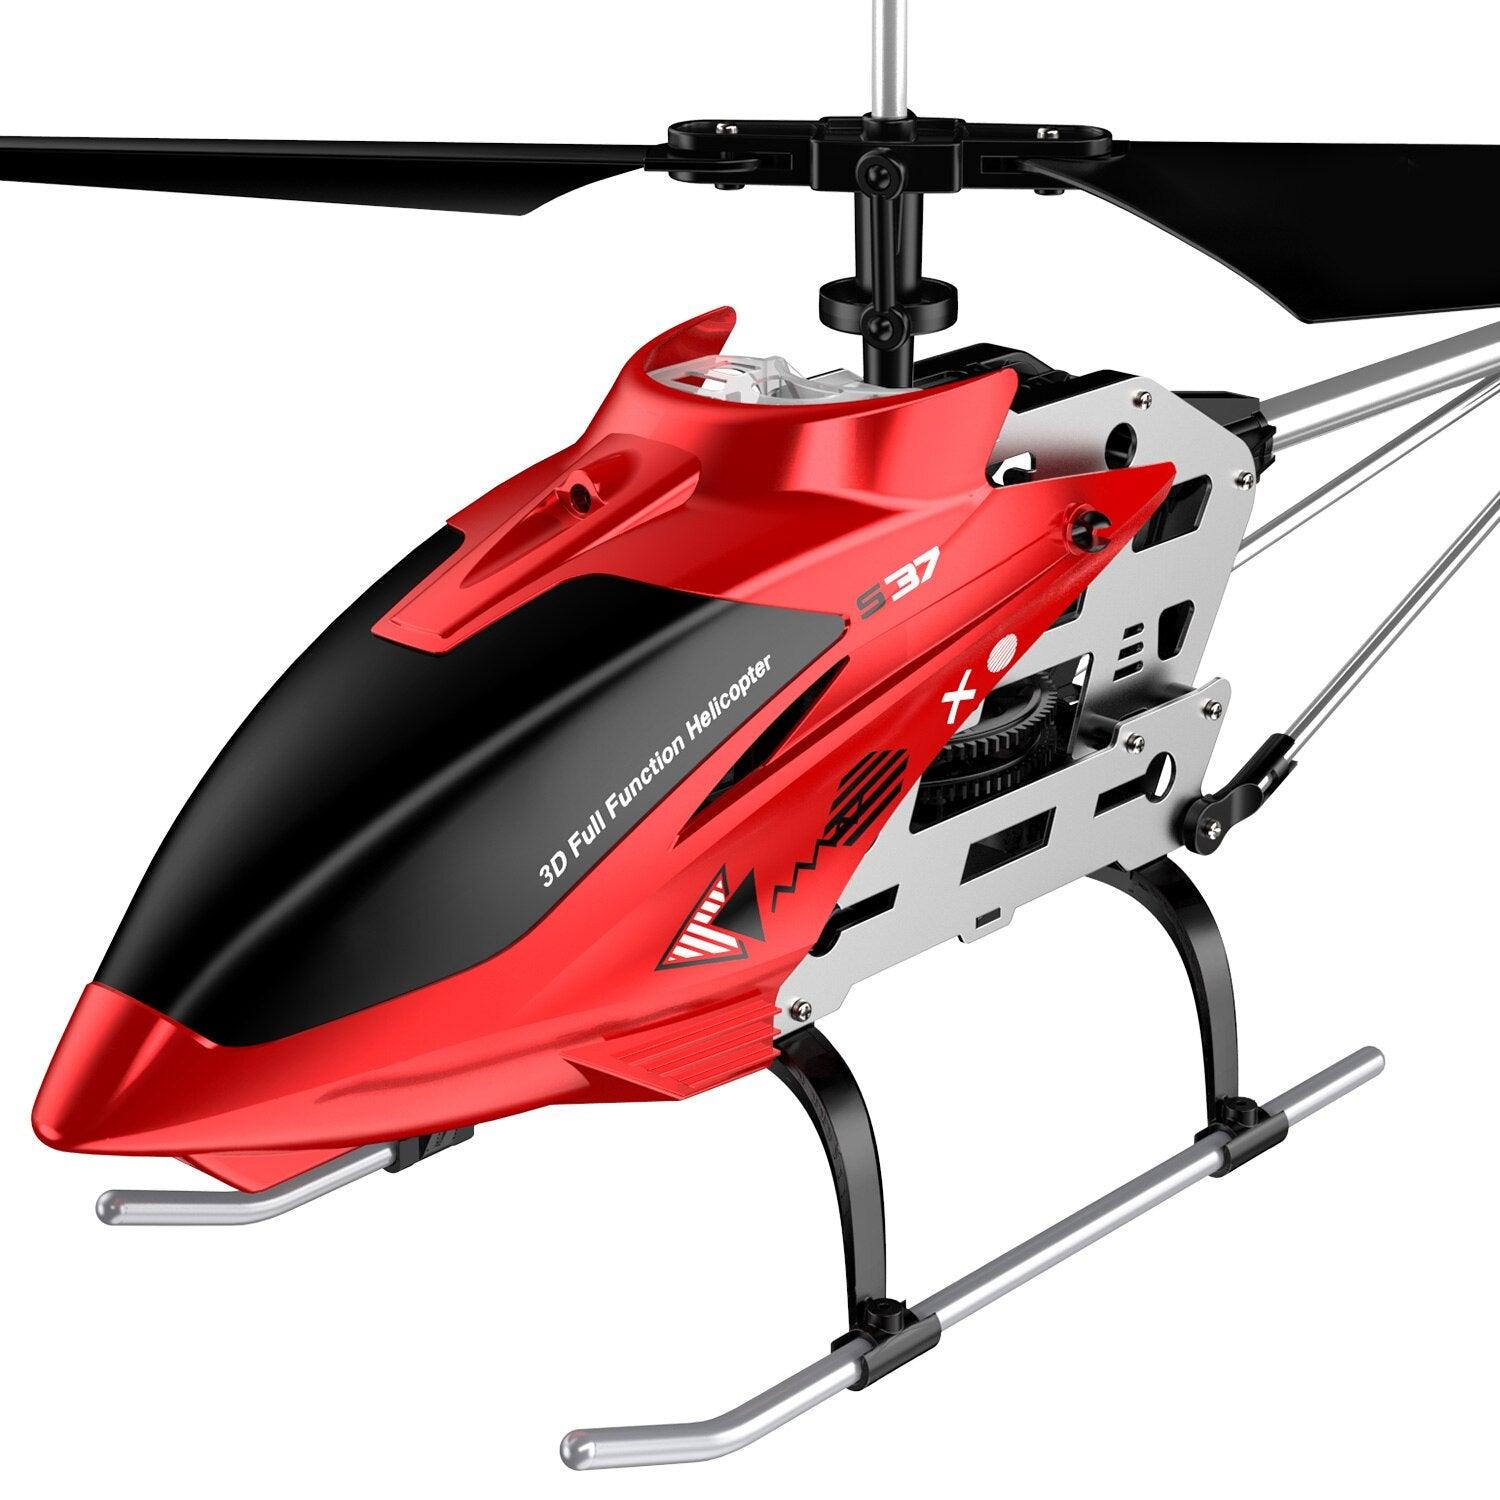 SYMA Remote Control Helicopter, S107H-E Aircraft with Altitude Hold, One  Key take Off/Landing, 3.5 Channel, Gyro Stabilizer, High &Low Speed, LED